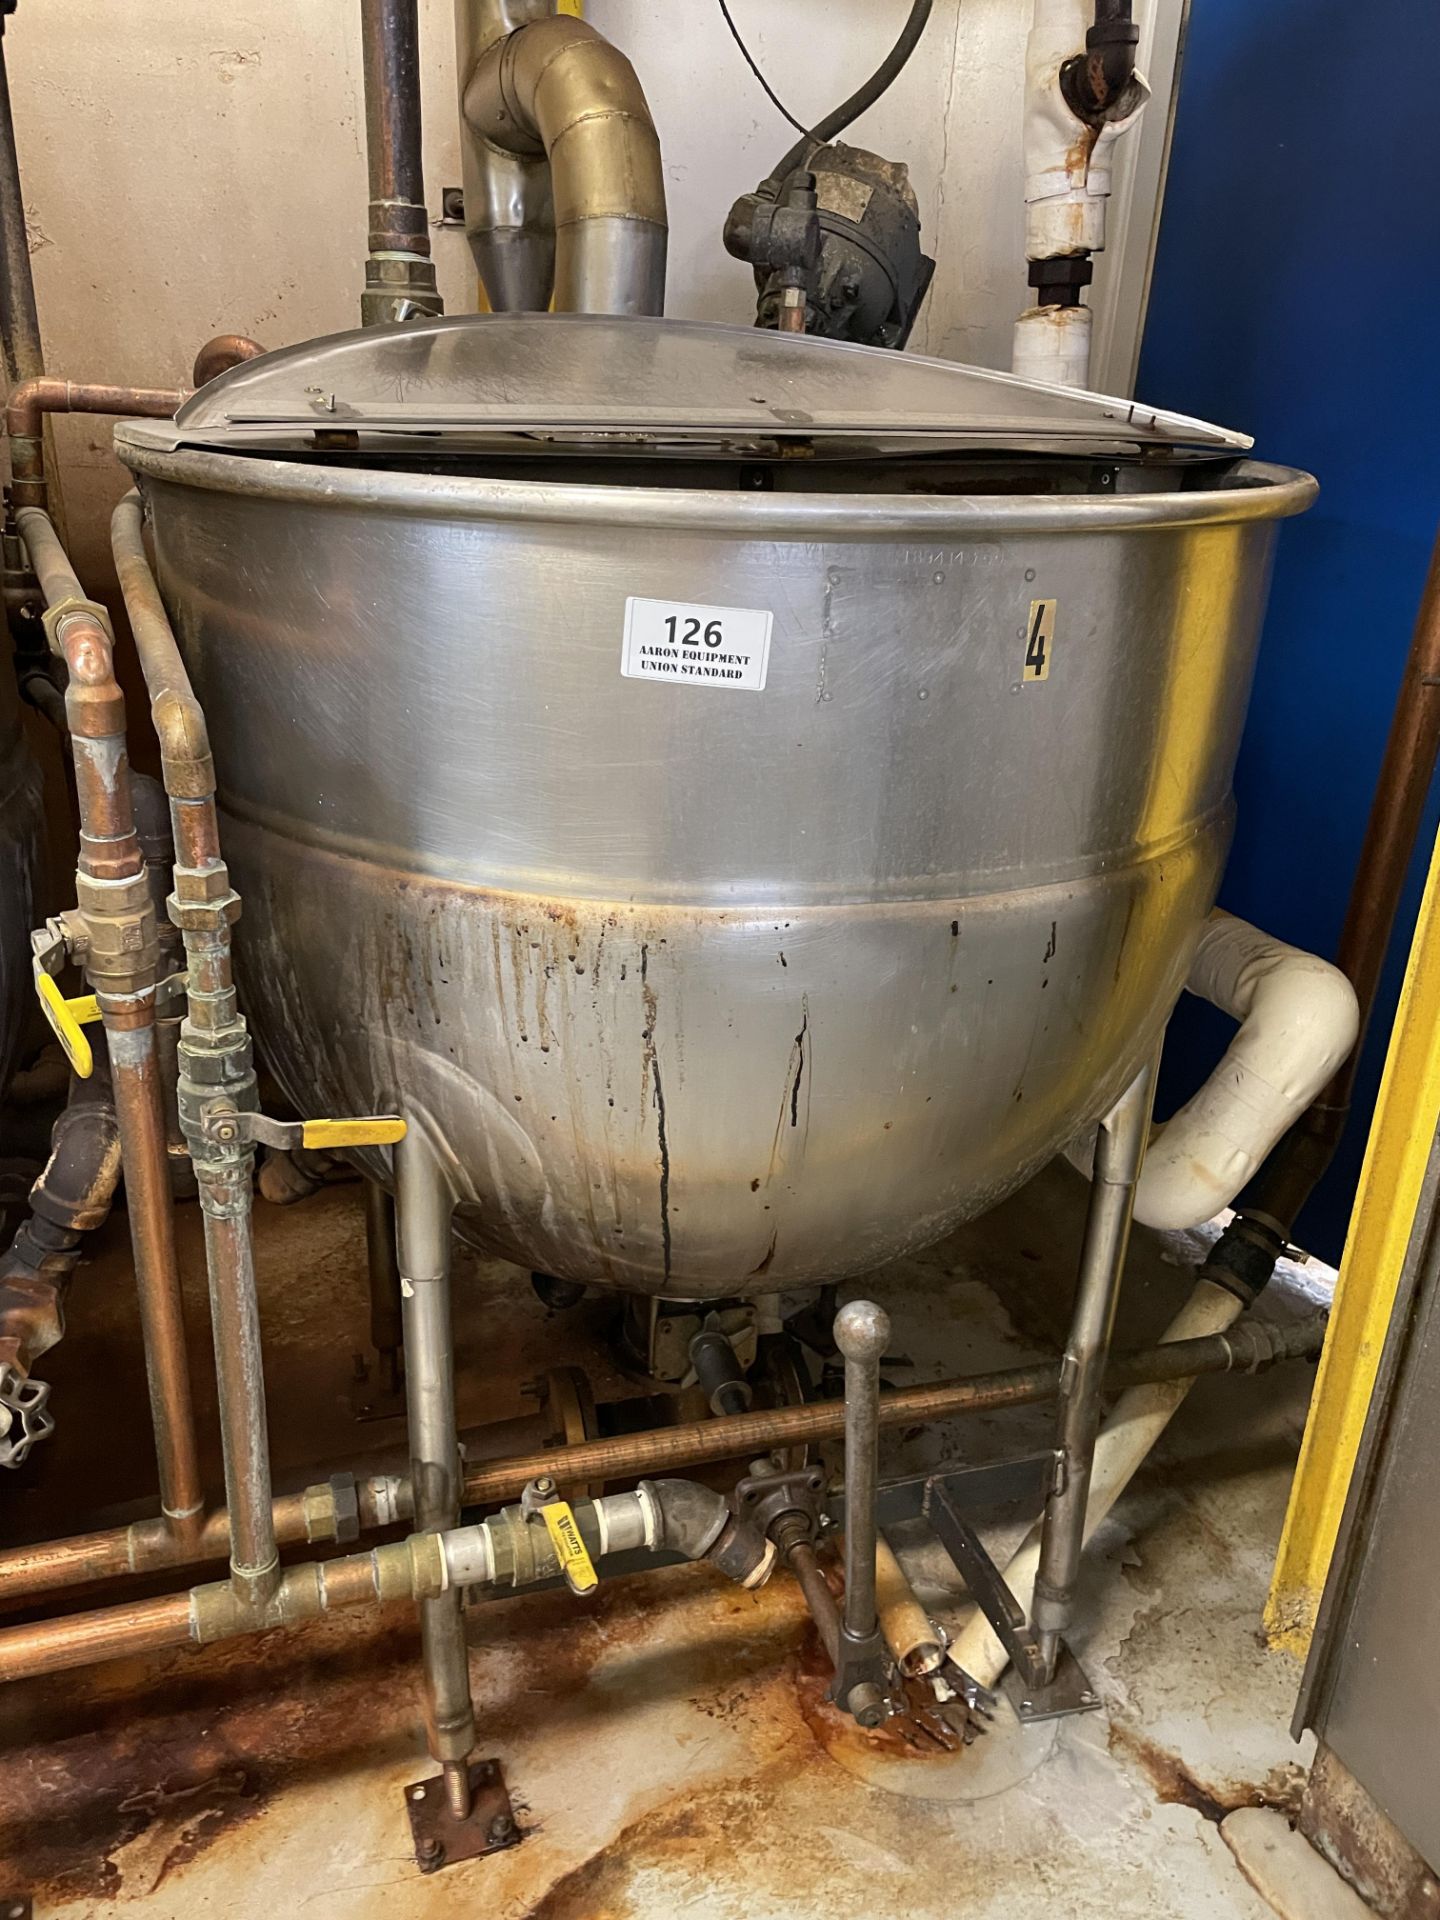 Asset 126 - 150 Gallon Stainless Steel jacketed Kettle, 43" diameter x 32" with Propellor type